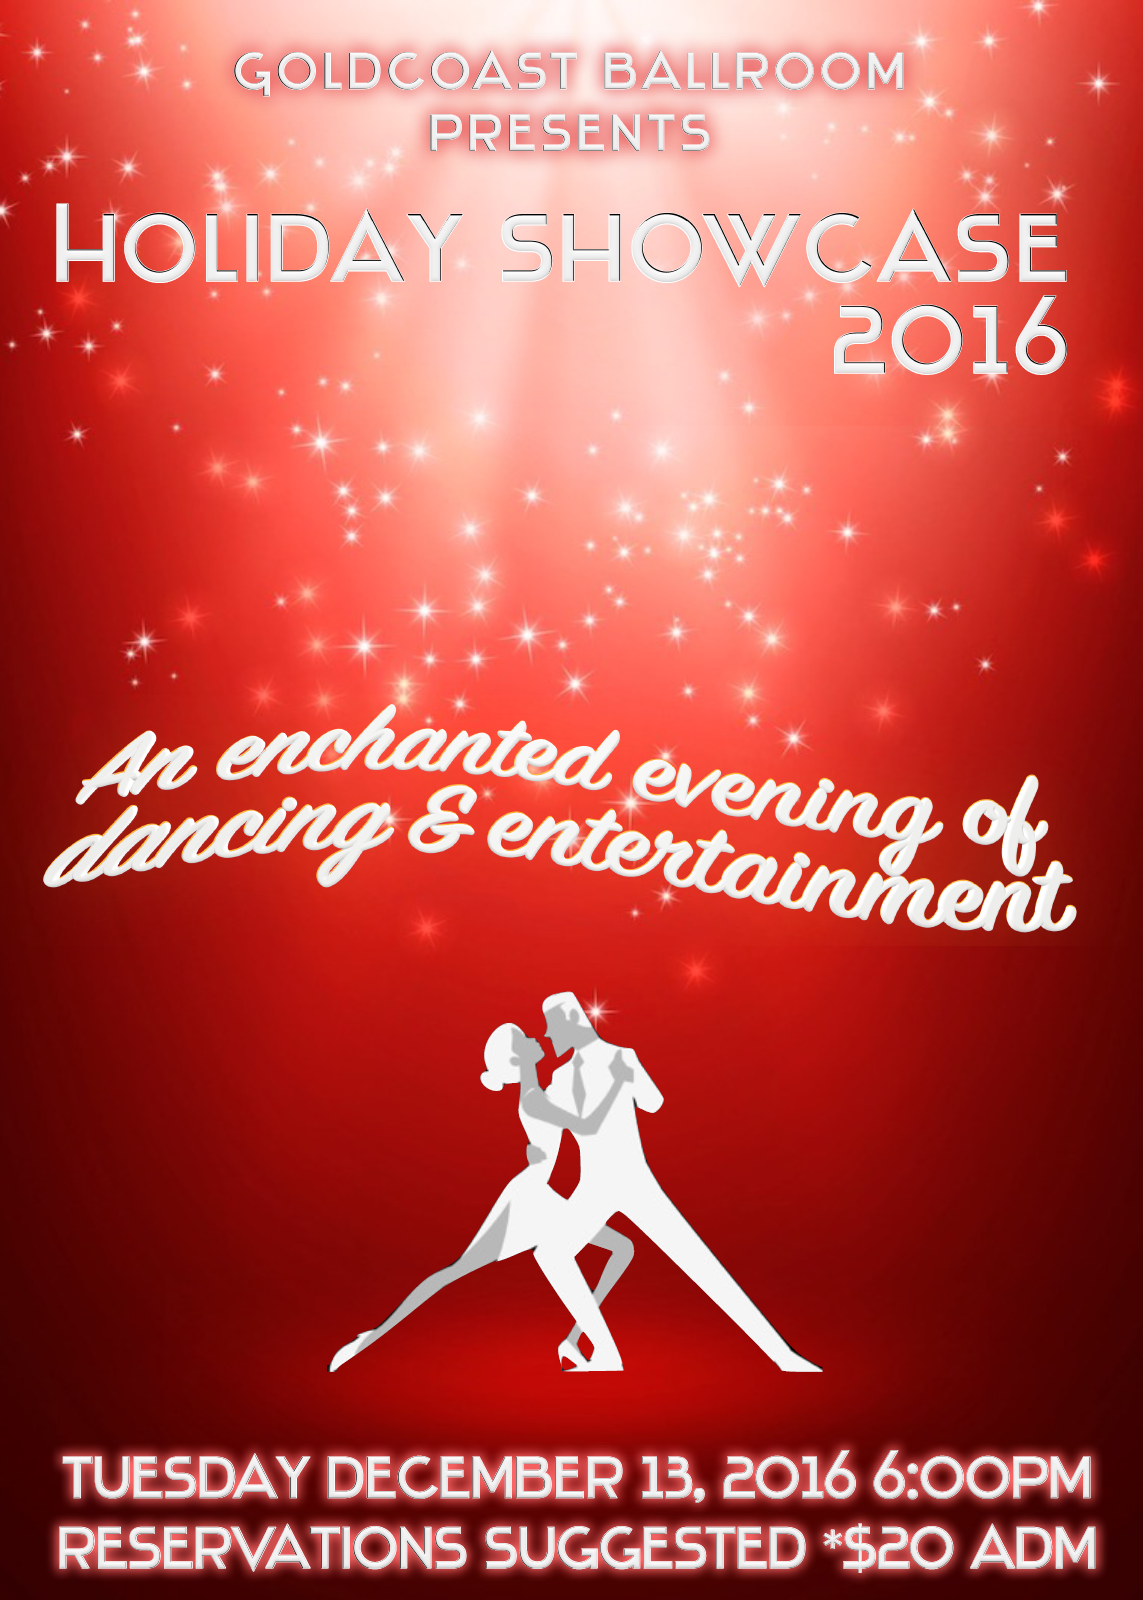 Clisk to Print Entry Form & Flyer for 2016 Holiday Showcase -December 13, 2016 at  Goldcoast Ballroom